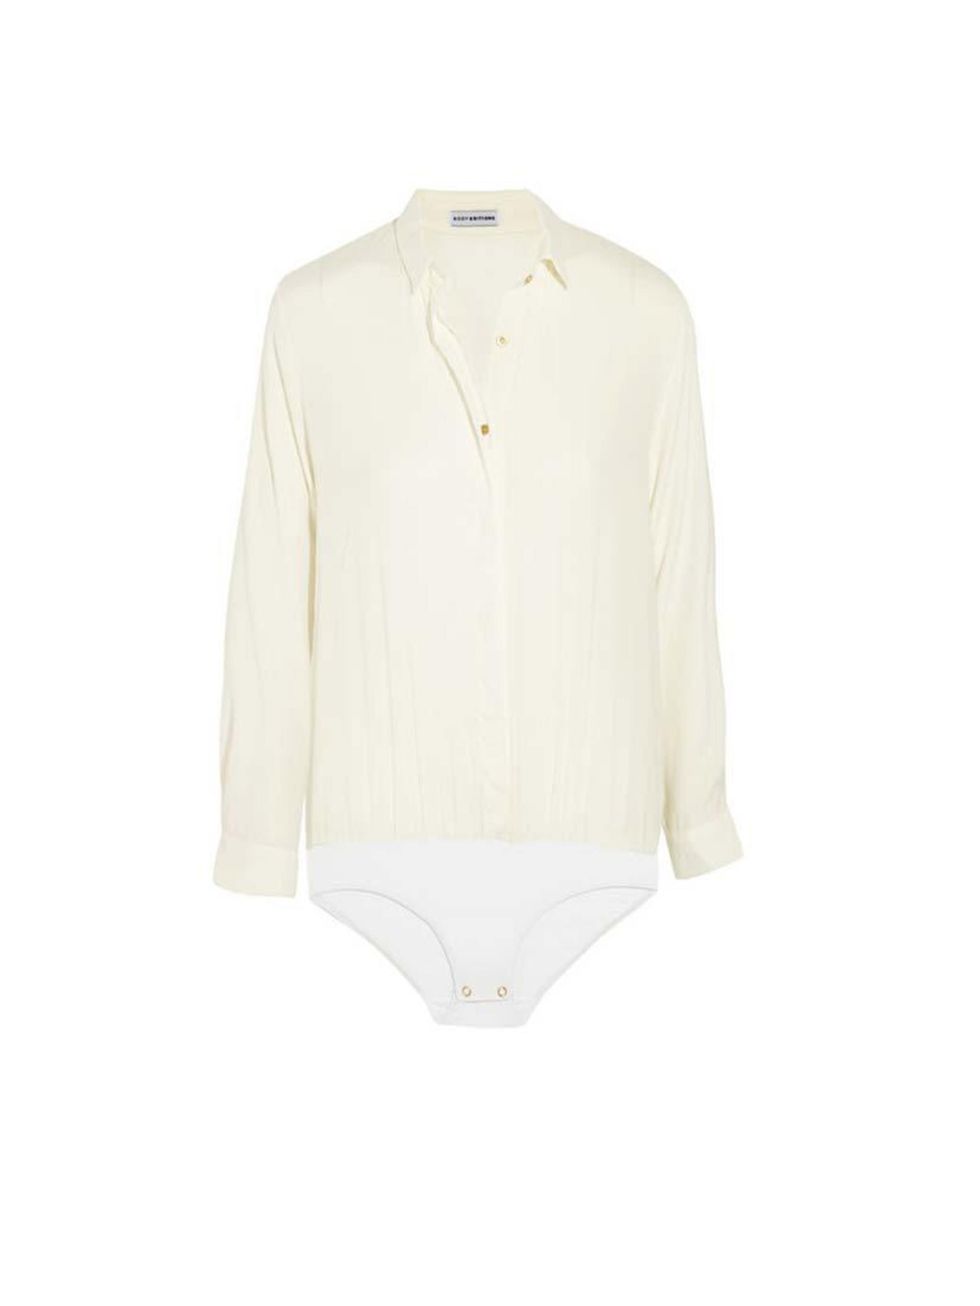 <p>A shirt that stays tucked in until the end of the day? This body-shirt is a must for your Fashion Week wardrobe </p>

<p>Body Editions, £240 available at <a href="http://www.net-a-porter.com/product/475206/Finds/-body-editions-silk-and-stretch-jersey-b